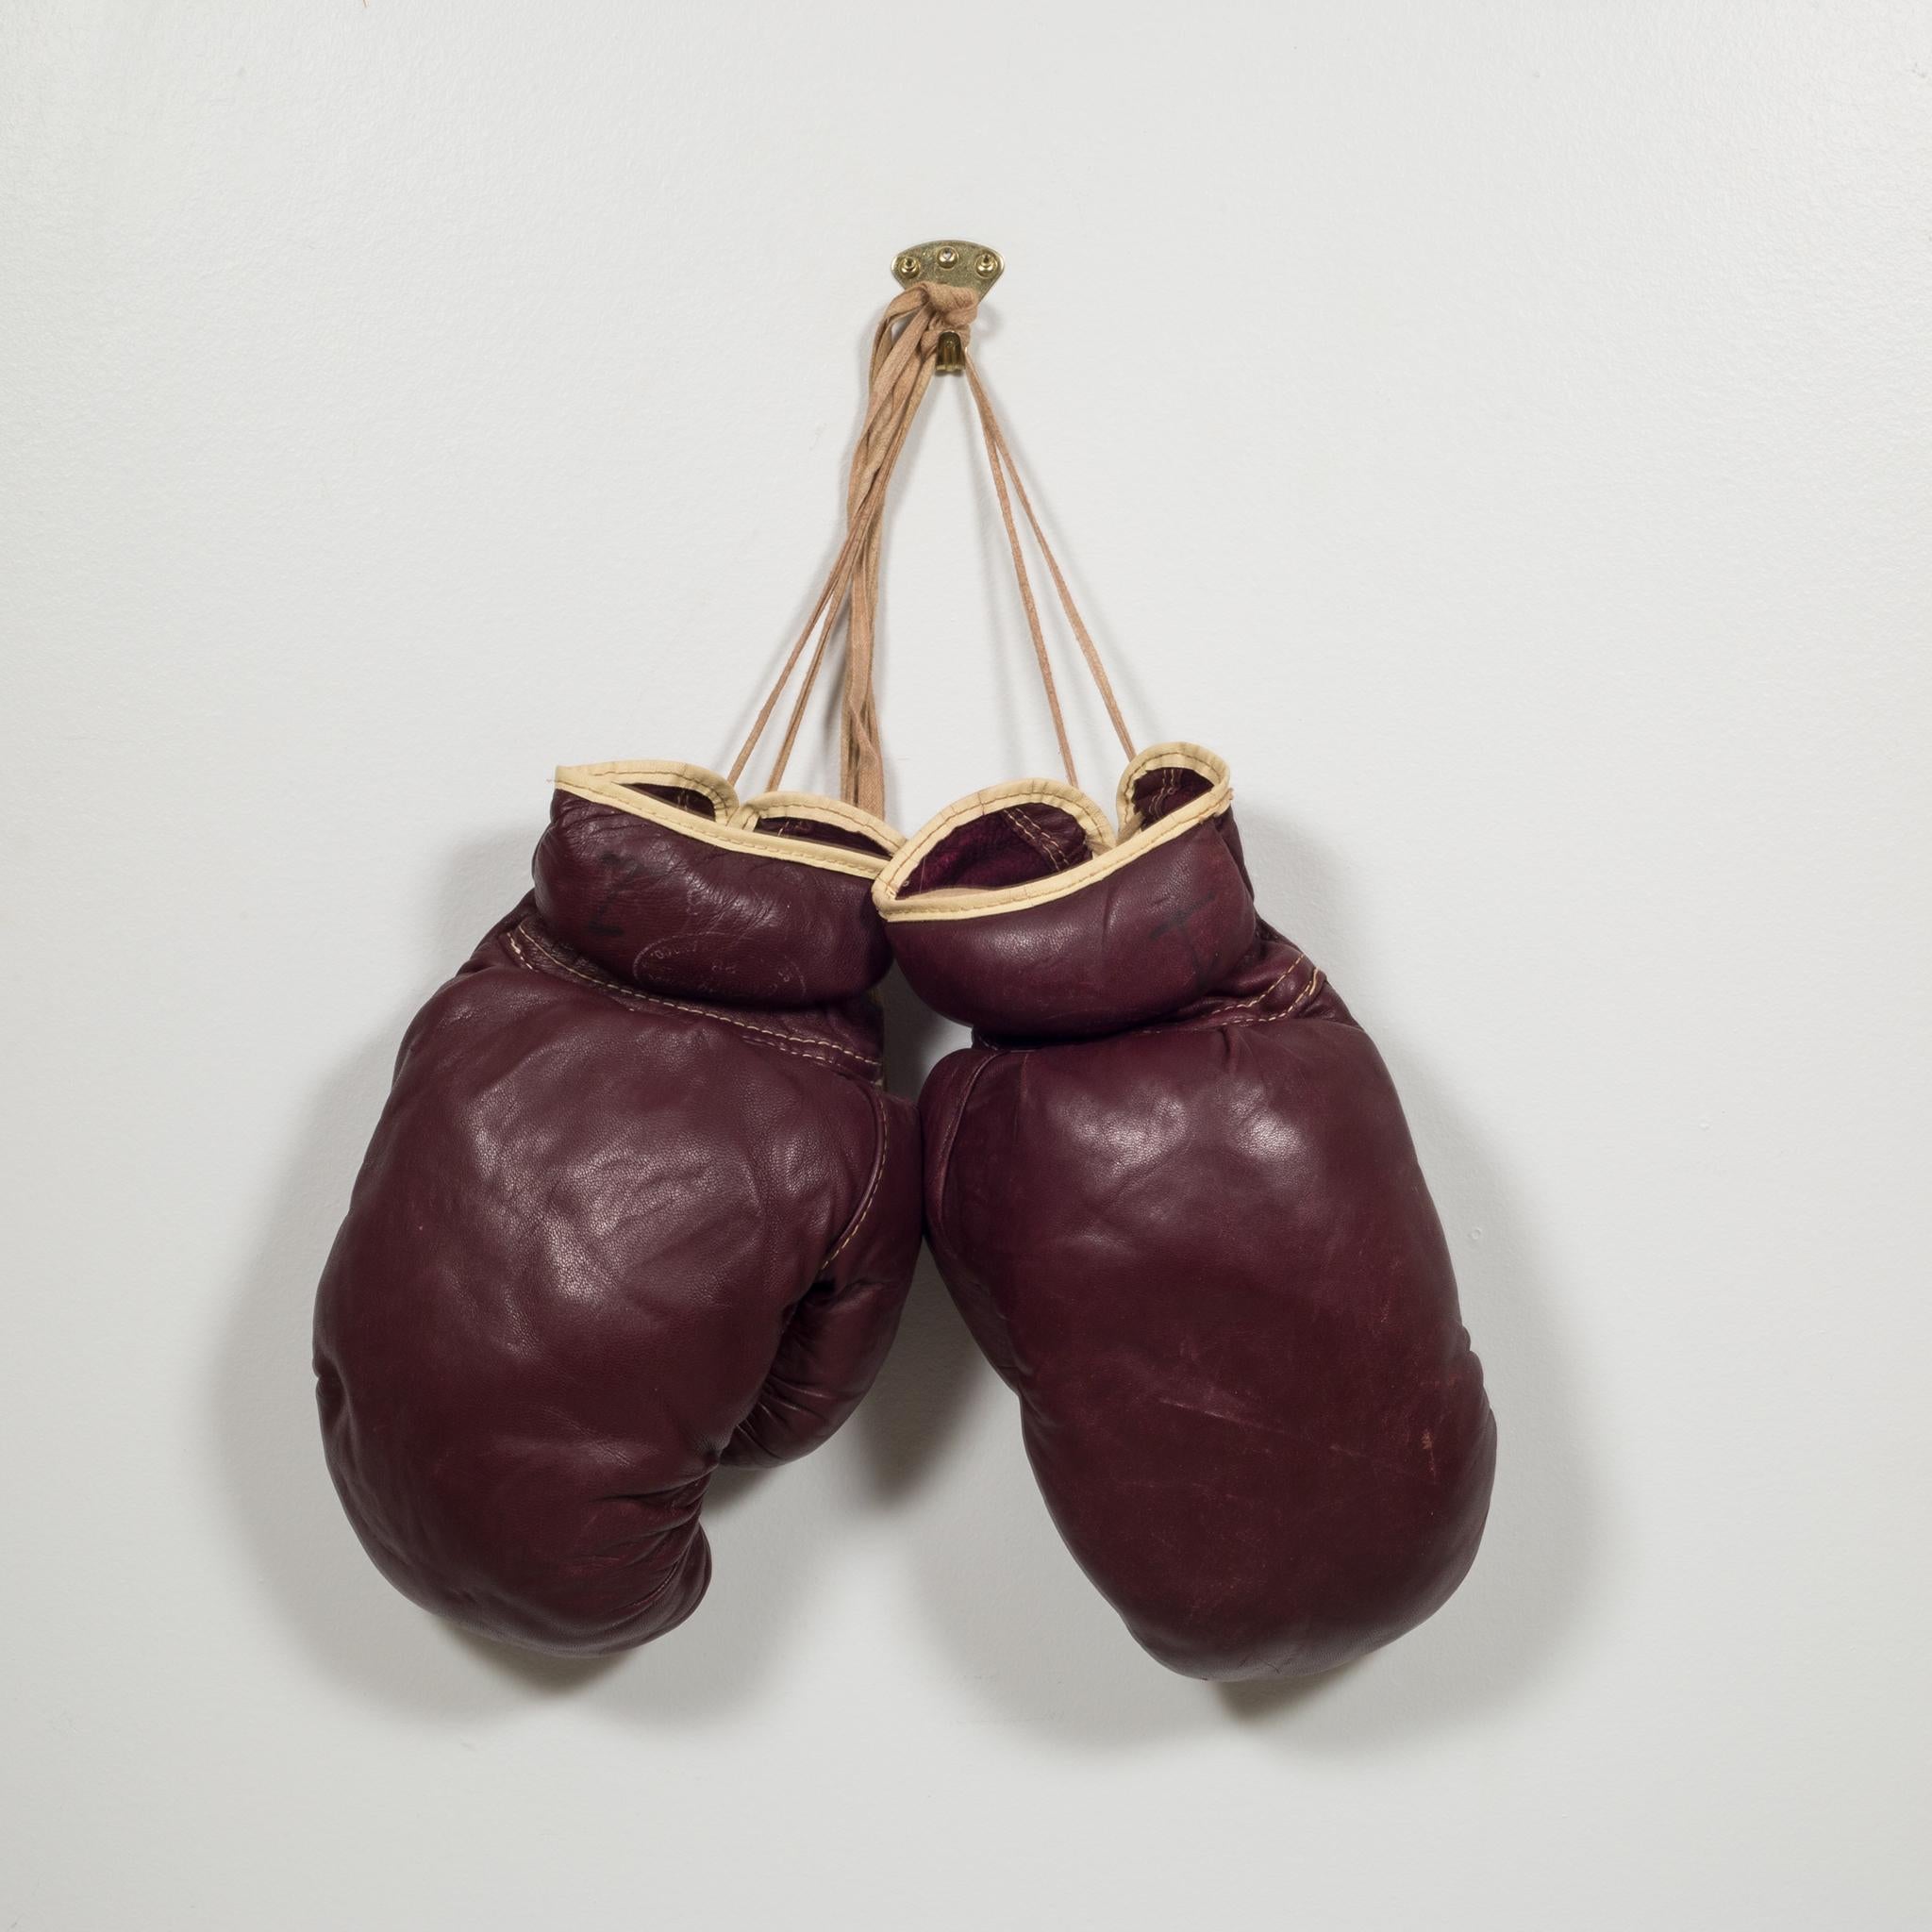 About
This is an authentic boxing gloves with reddish, brown leather. Each glove has tan leather piping and laces. The leather is very soft and is good condition. Stamped J.C. Higgins label on each glove but is very faded. 

Creator J.C. Higgins,